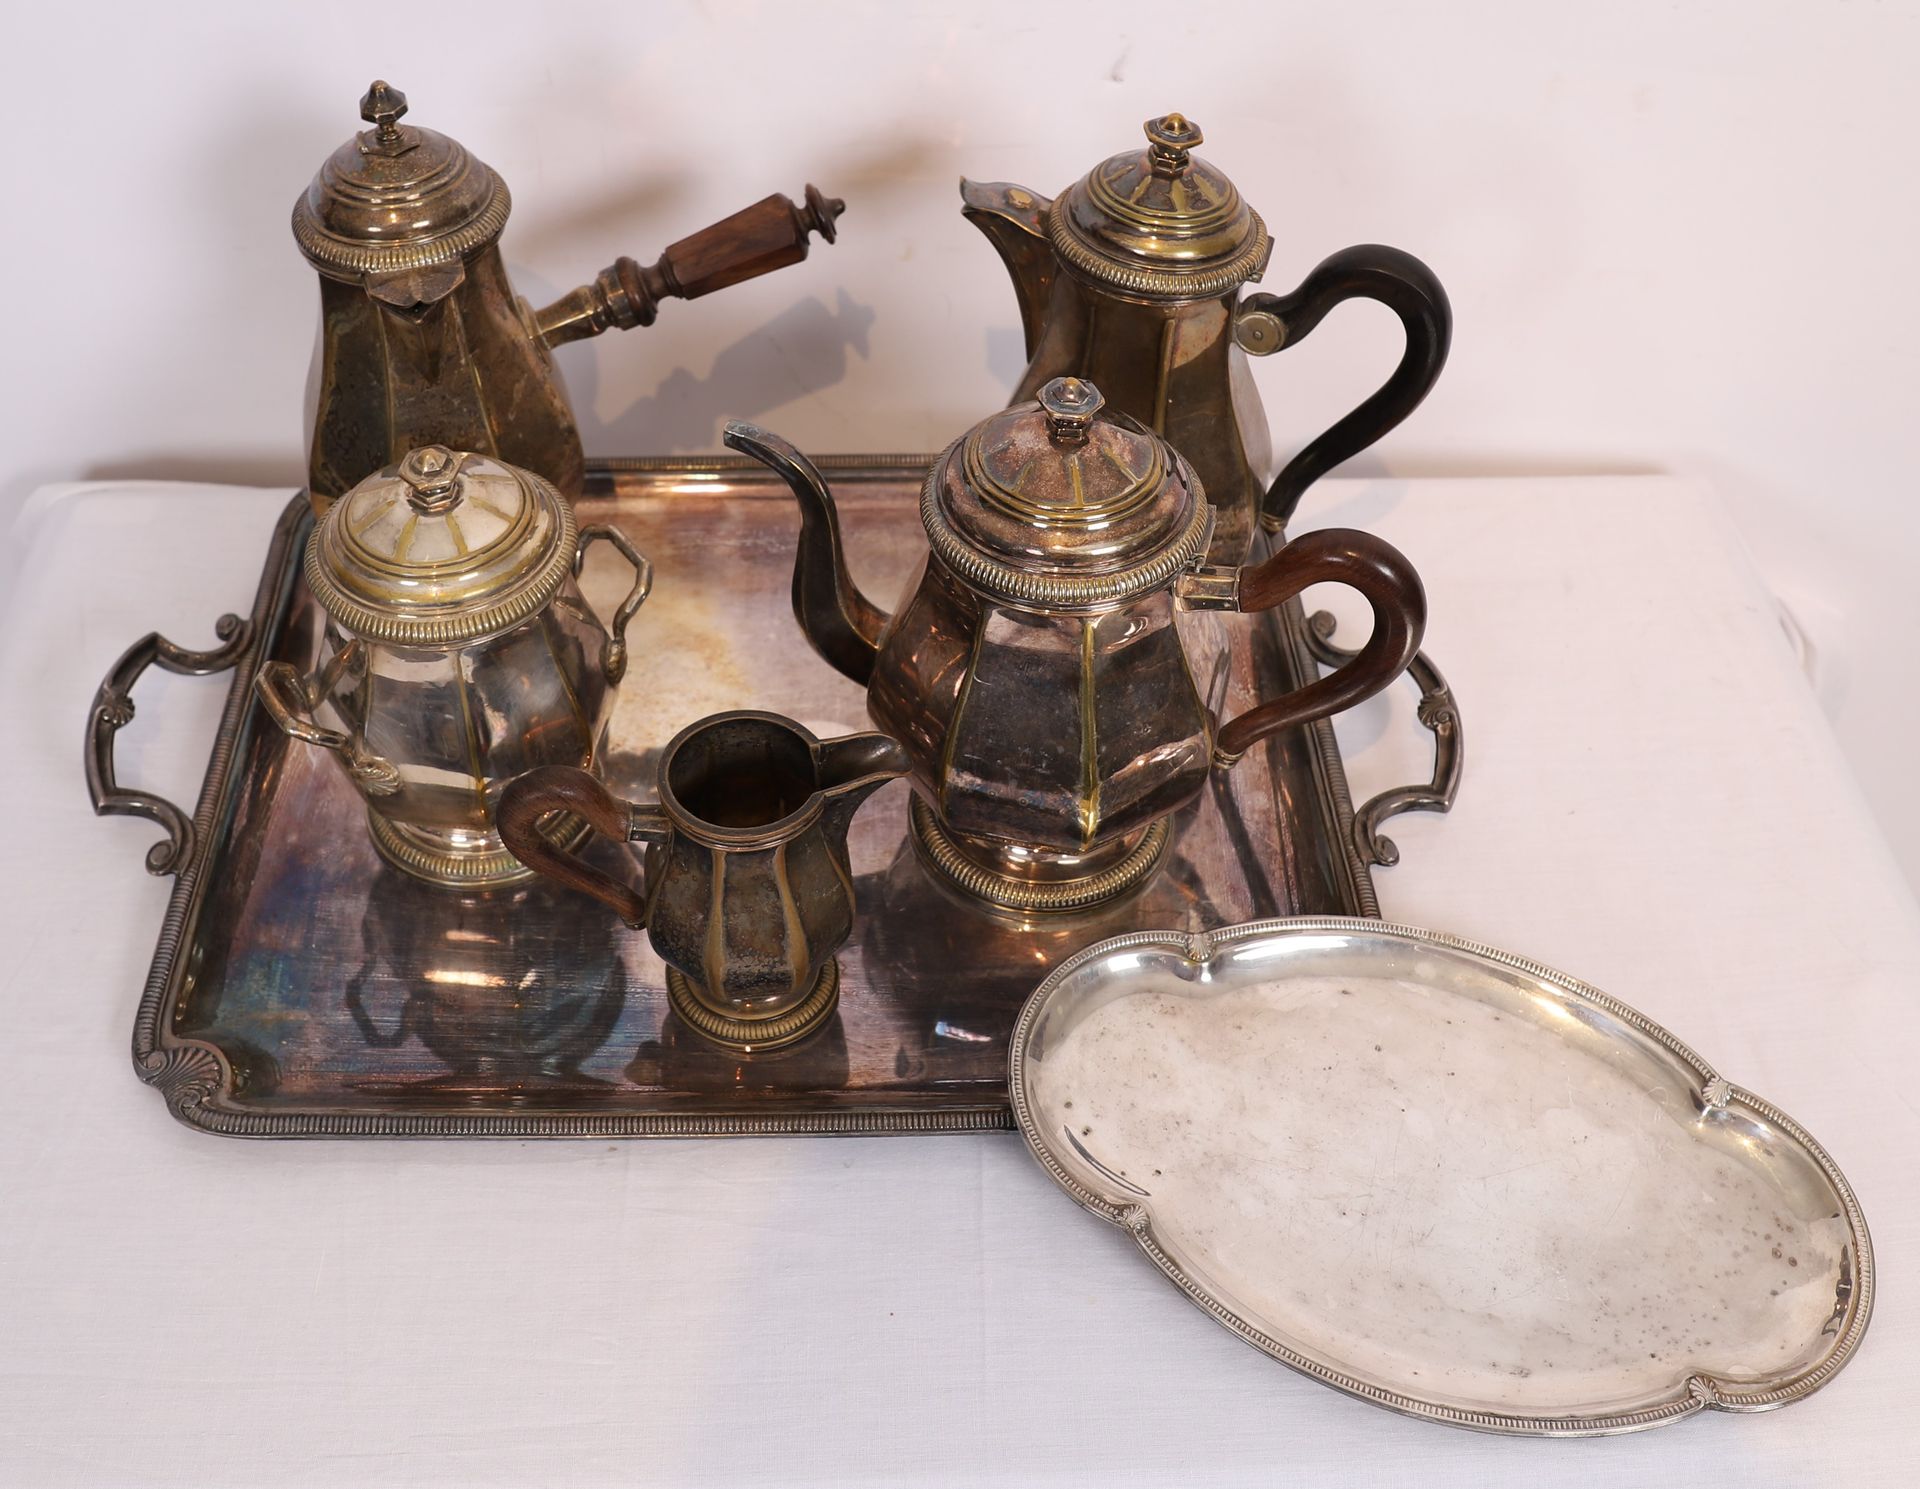 Null SILVER-PLATED METAL TEA AND COFFEE SET

Including a teapot, a coffee pot, a&hellip;